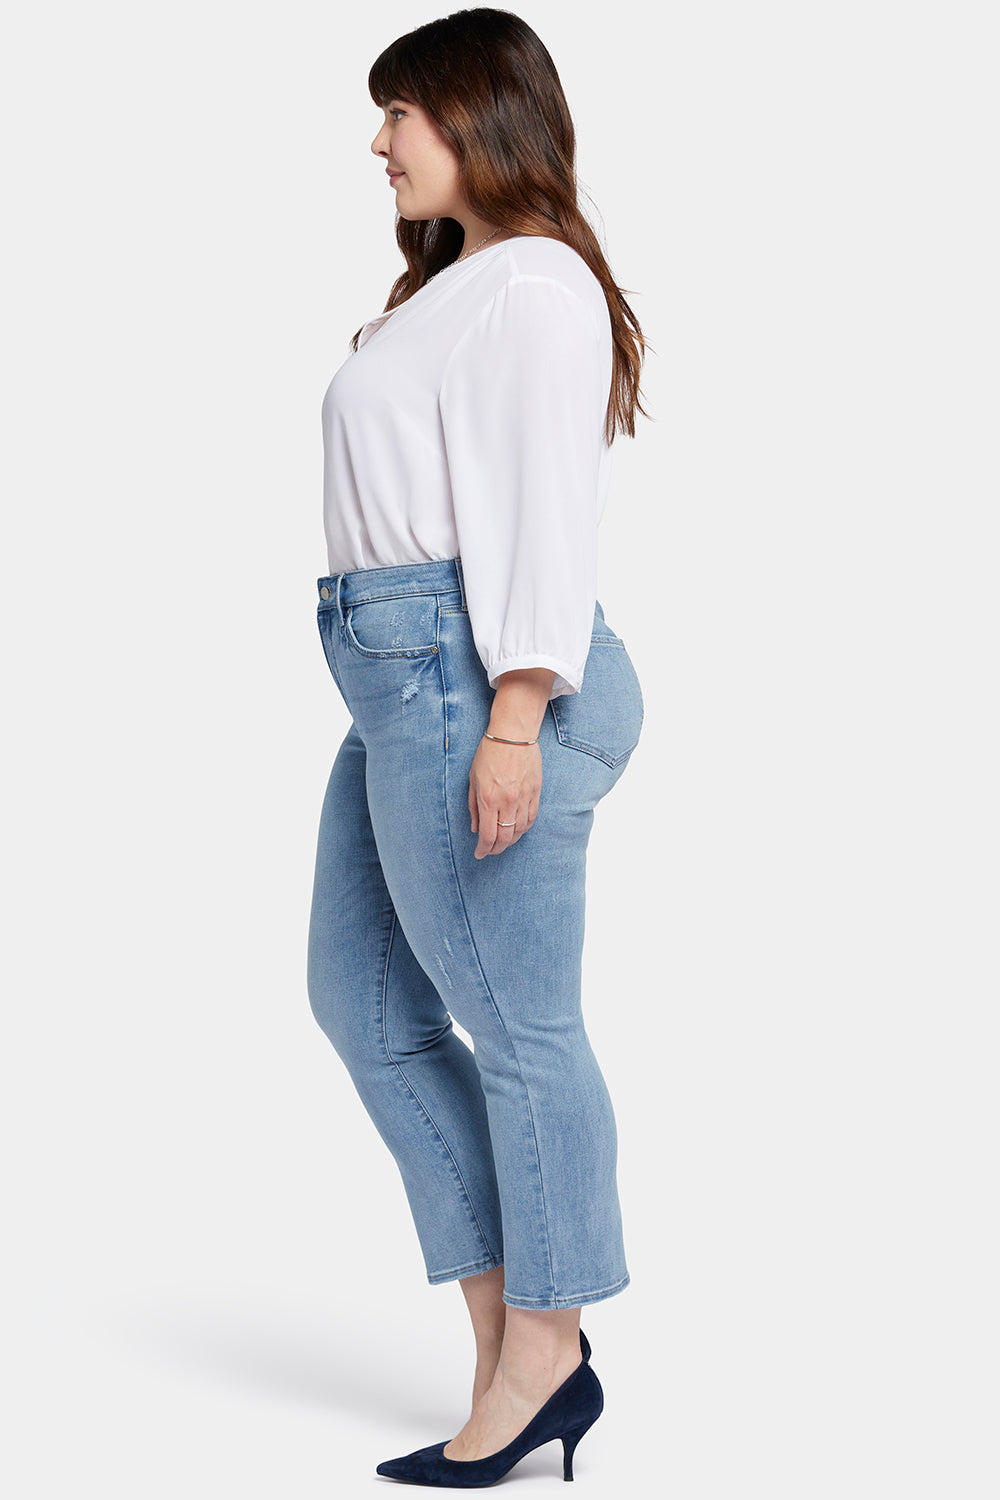 NYDJ Marilyn Straight Ankle Jeans In Plus Size  - Lakefront